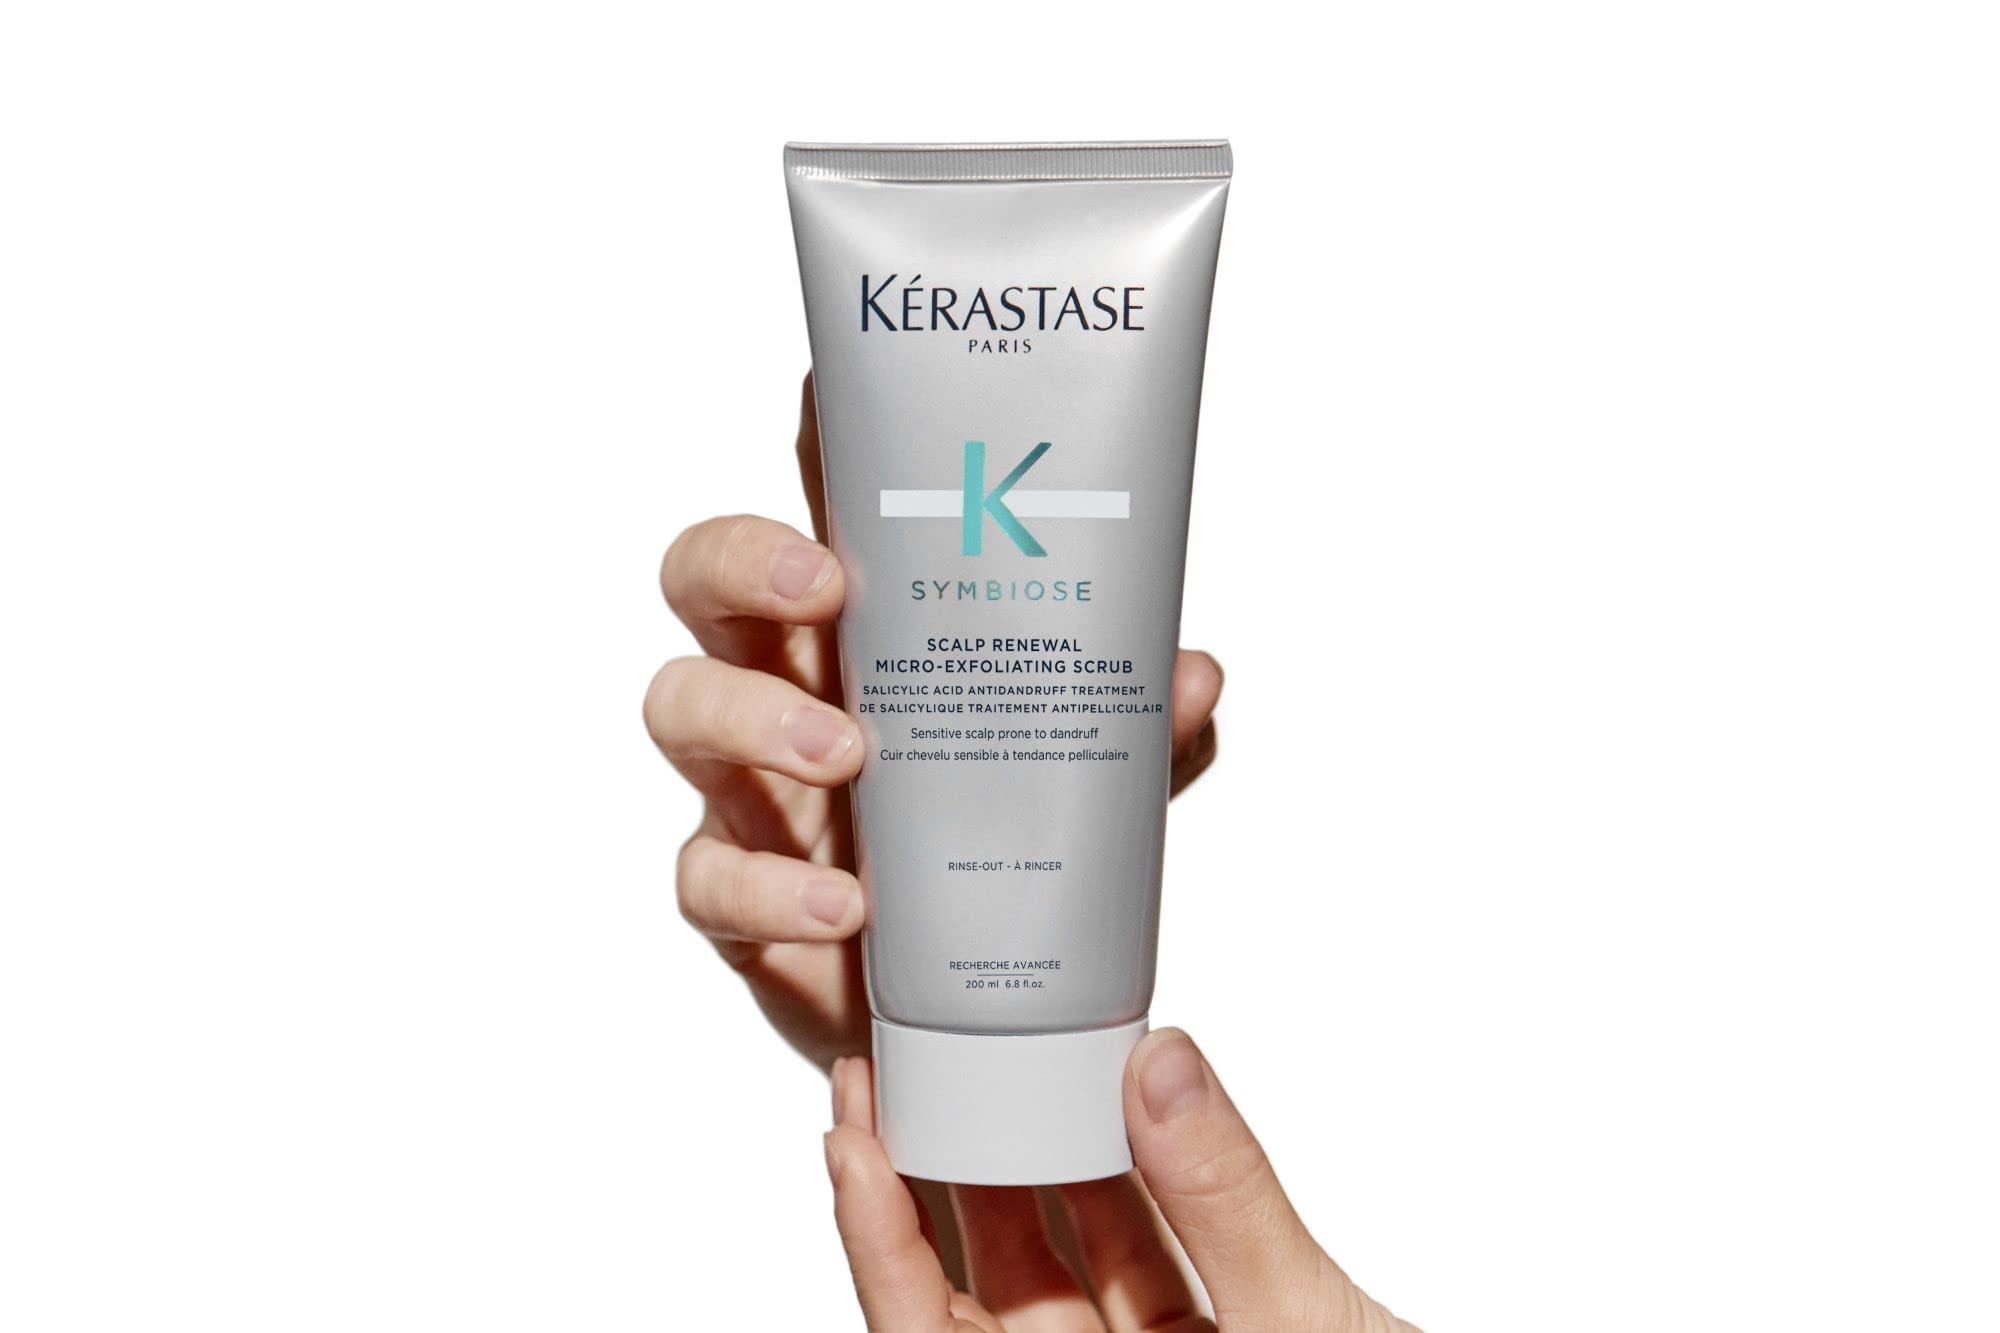 Kerastase Symbiose Scalp Renewal Micro-Exfoliating Scrub | For Scalps Prone to Dandruff | Purifies and Soothes | Helps Eliminate Signs of Dandruff | Formulated With Salicylic Acid | 6.8 Fl Oz